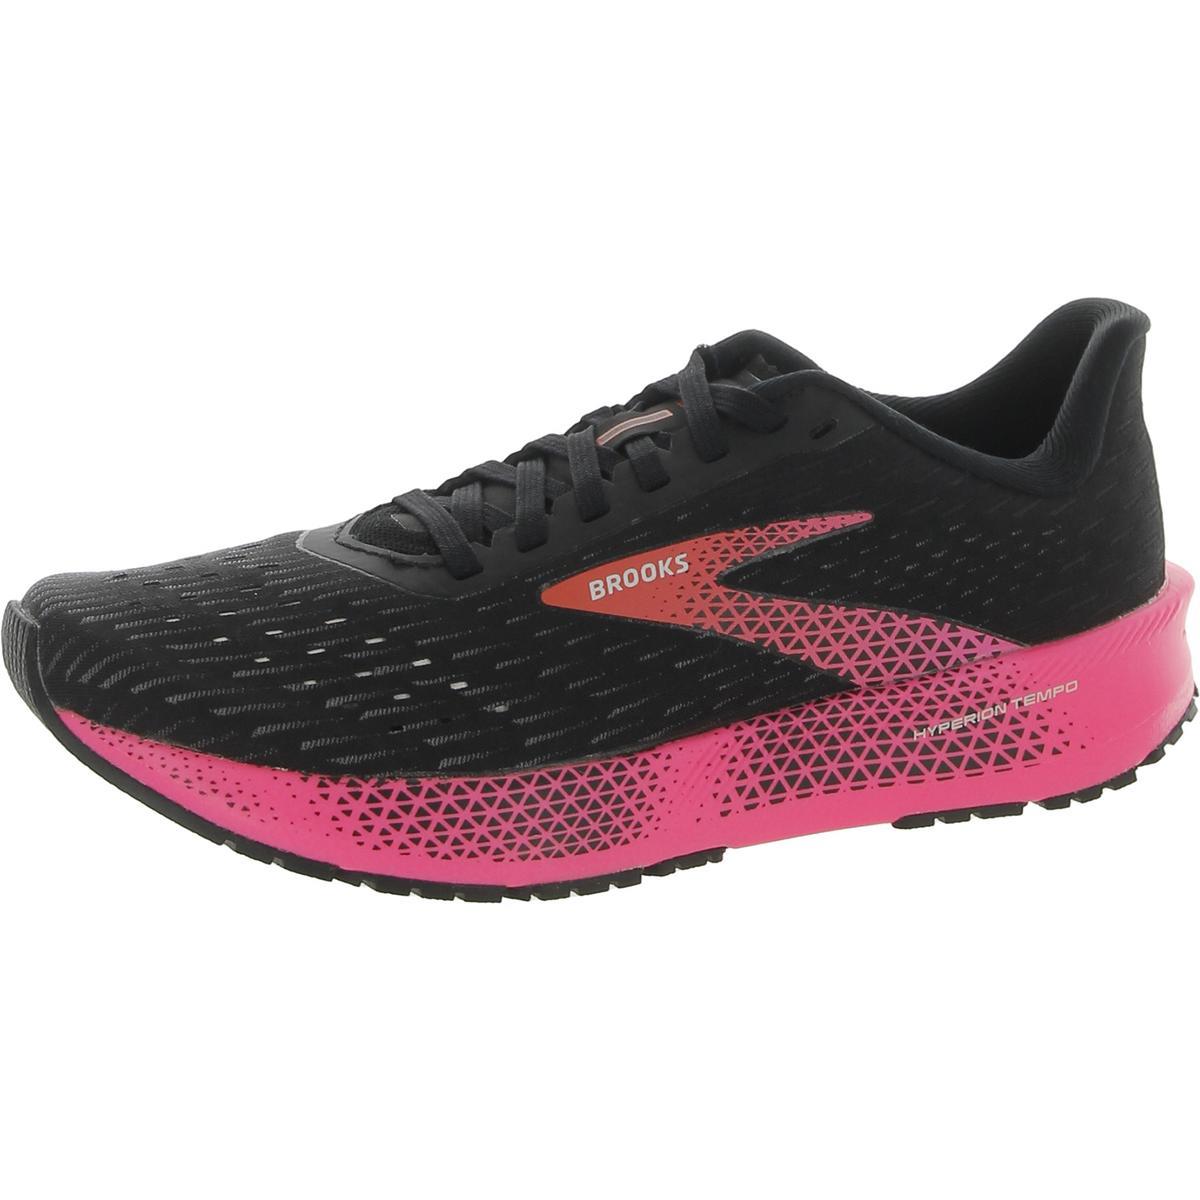 Brooks Womens Hyperion Tempo Gym Athletic and Training Shoes Sneakers Bhfo 5772 Black/Pink/Hot Coral